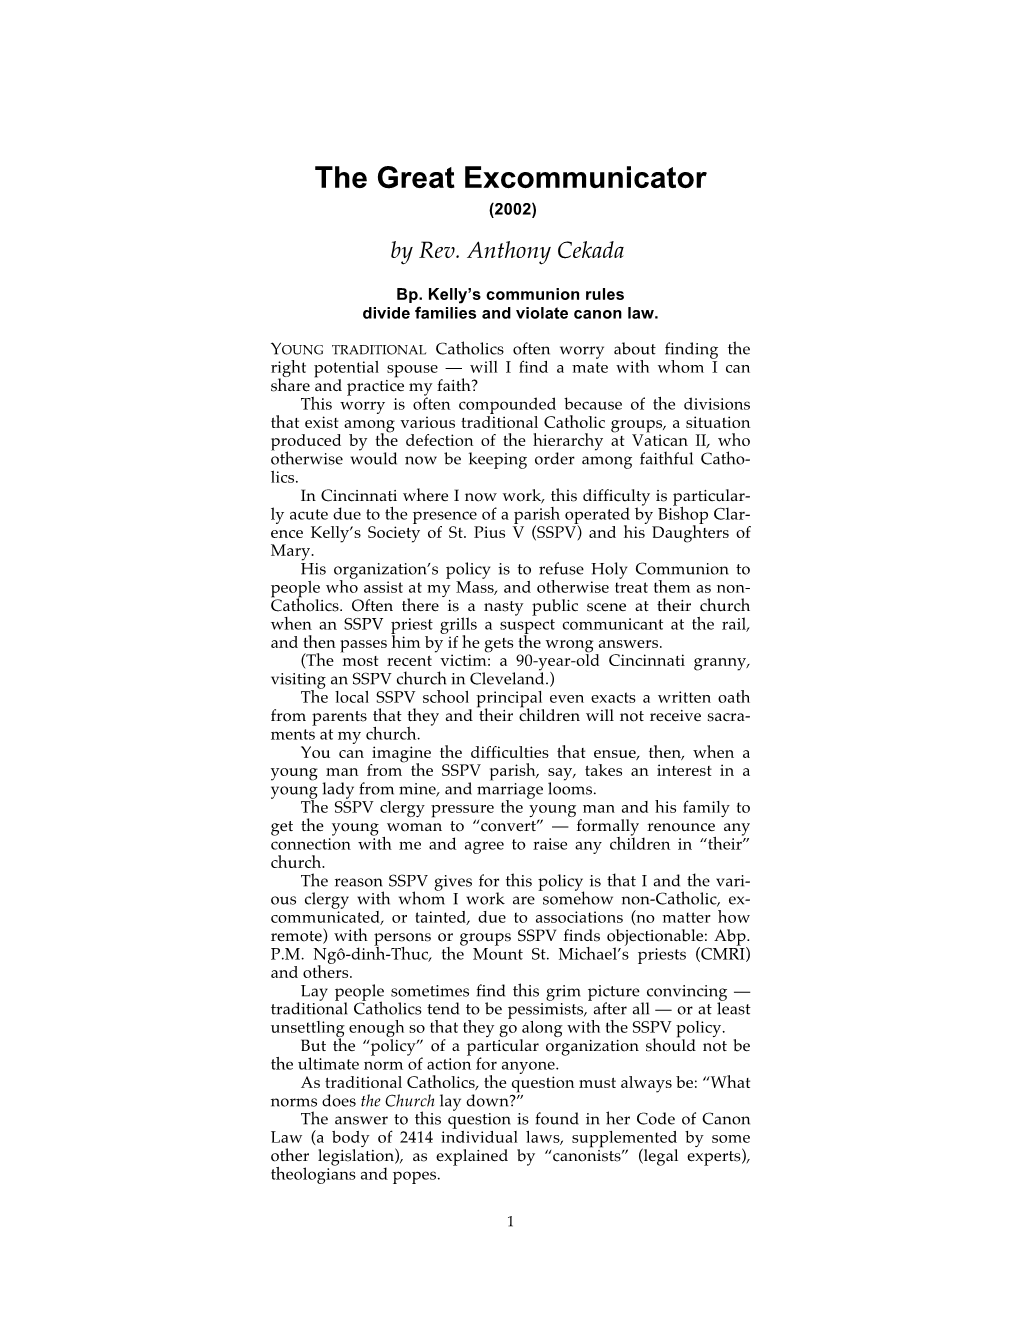 Great Excommunicator (2002) by Rev